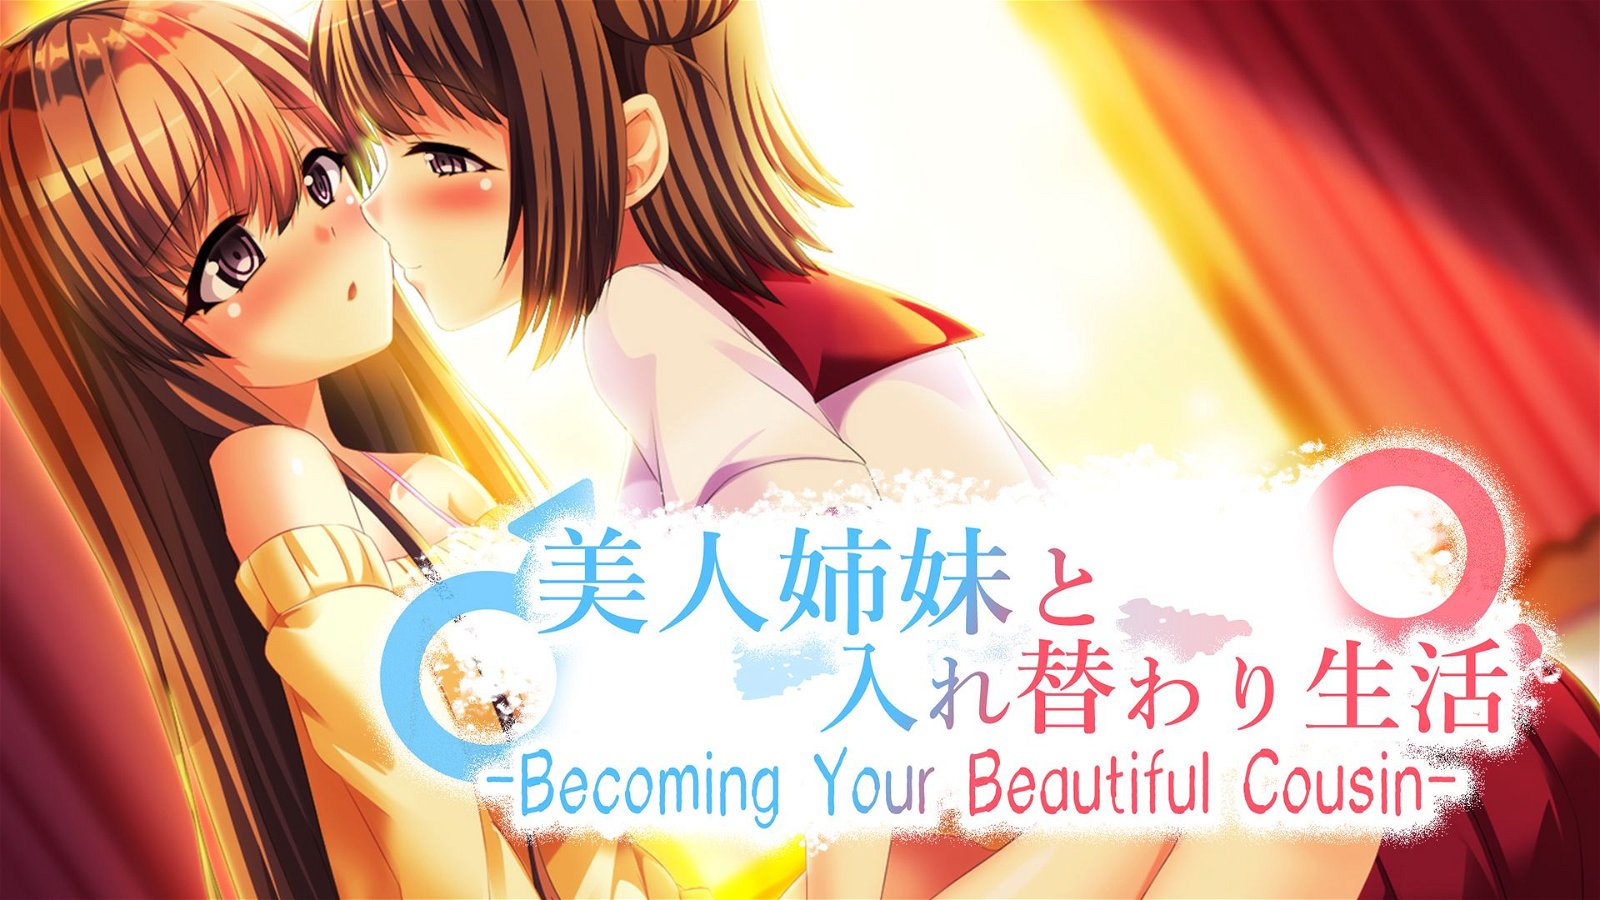 Image of -Becoming Your Beautiful Cousin- 美人姉妹と入れ替わり生活